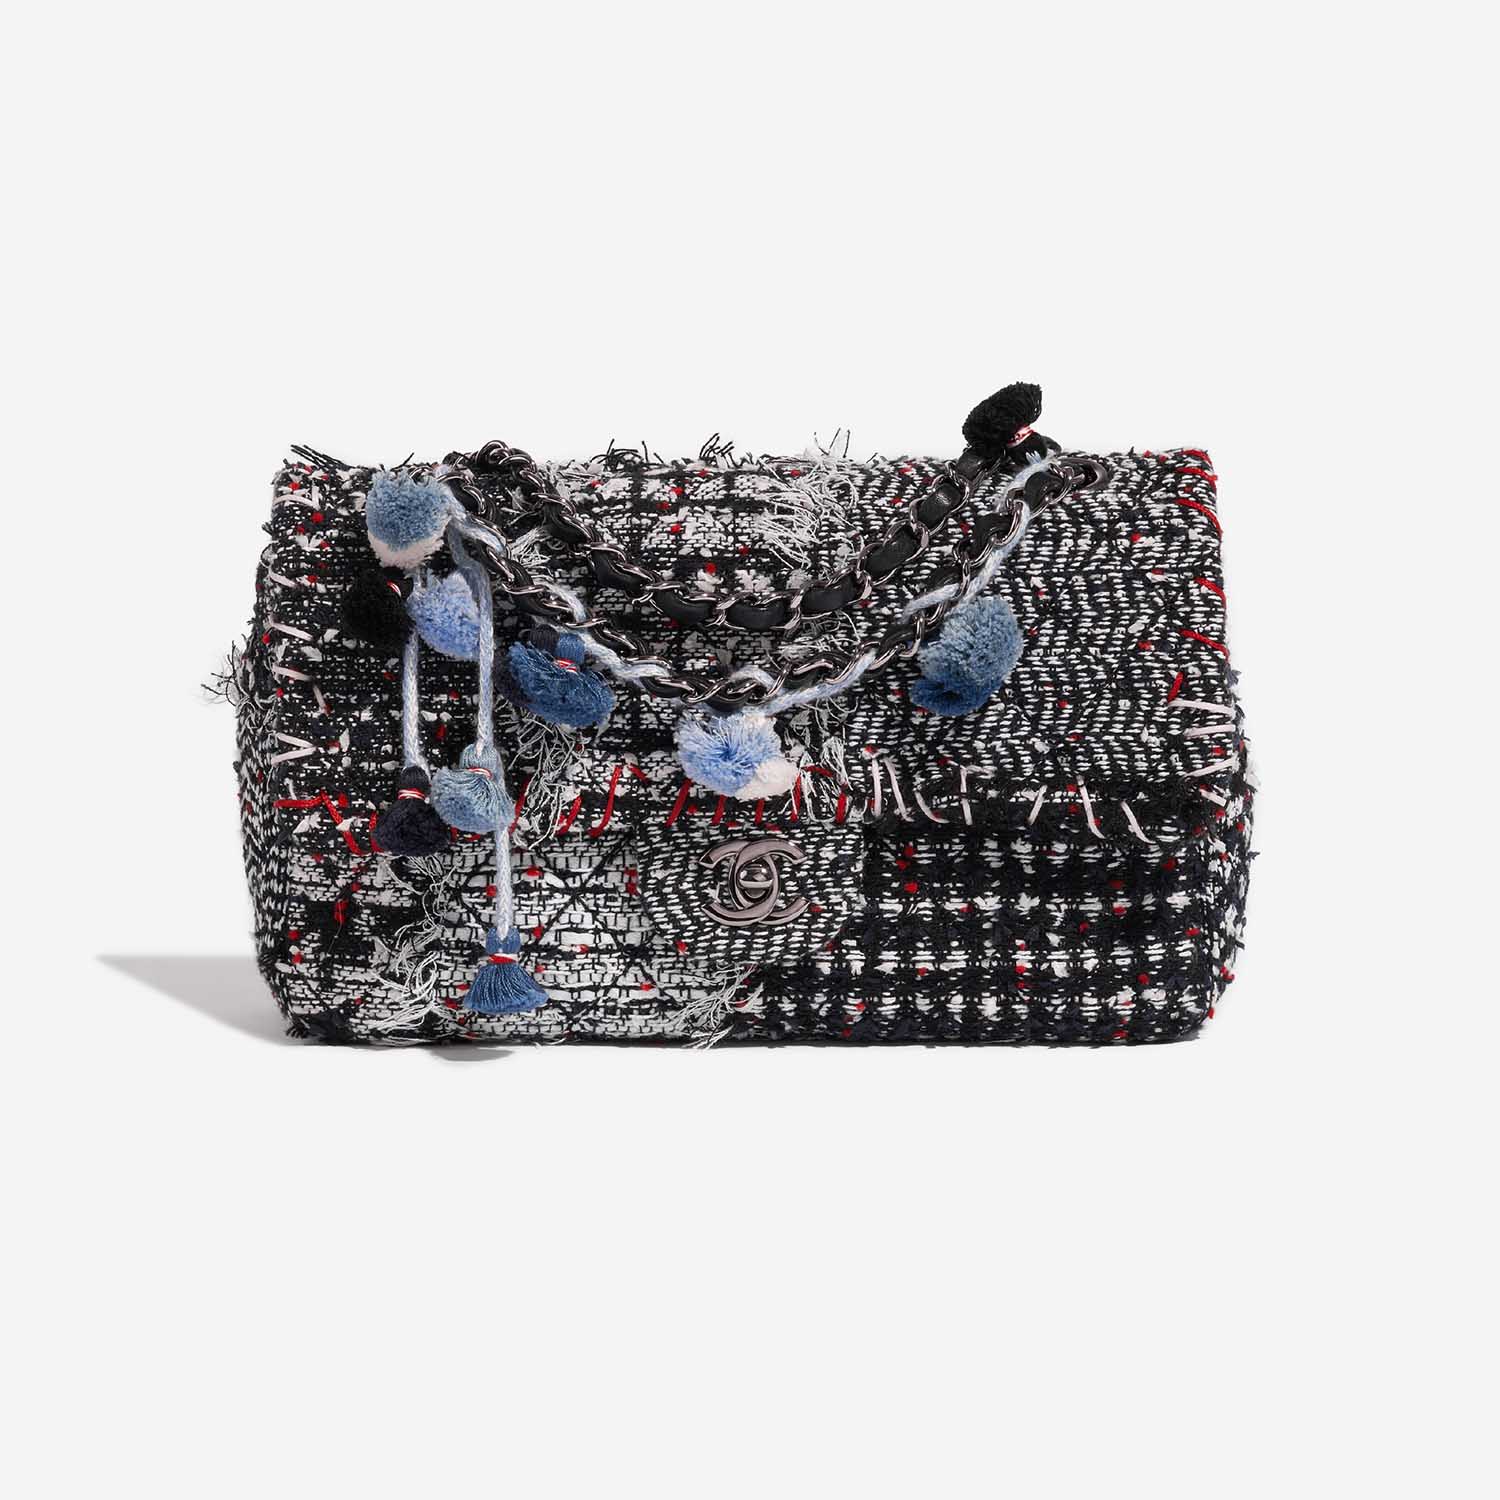 Pre-owned Chanel bag Timeless Medium Tweed Black / White / Red Black, White Front | Sell your designer bag on Saclab.com